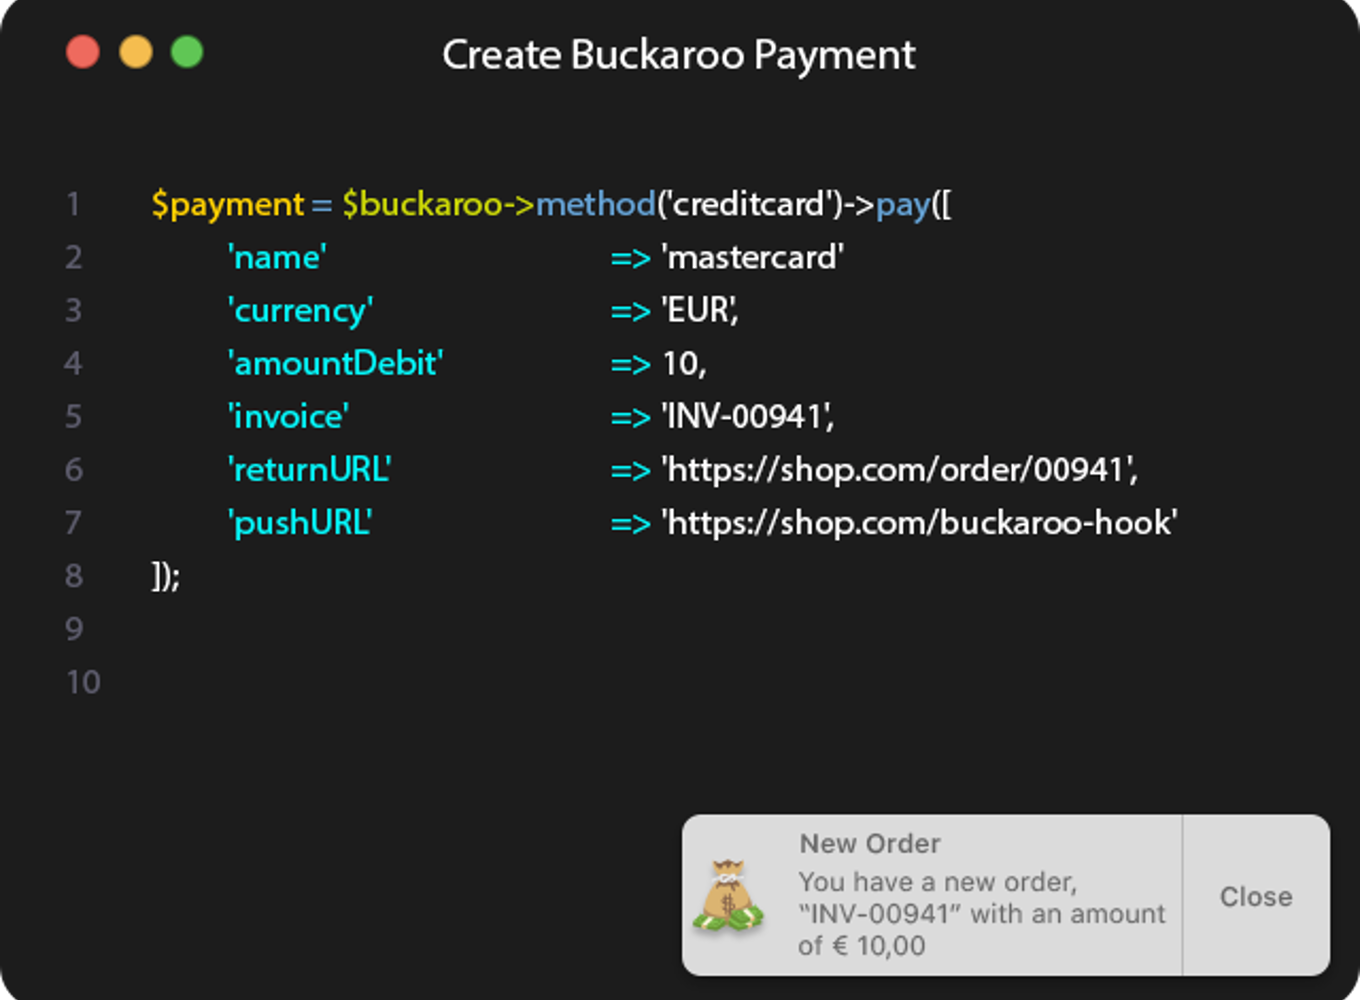 The PHP SDK comes with several examples found on Github, such as this Mastercard example transaction.